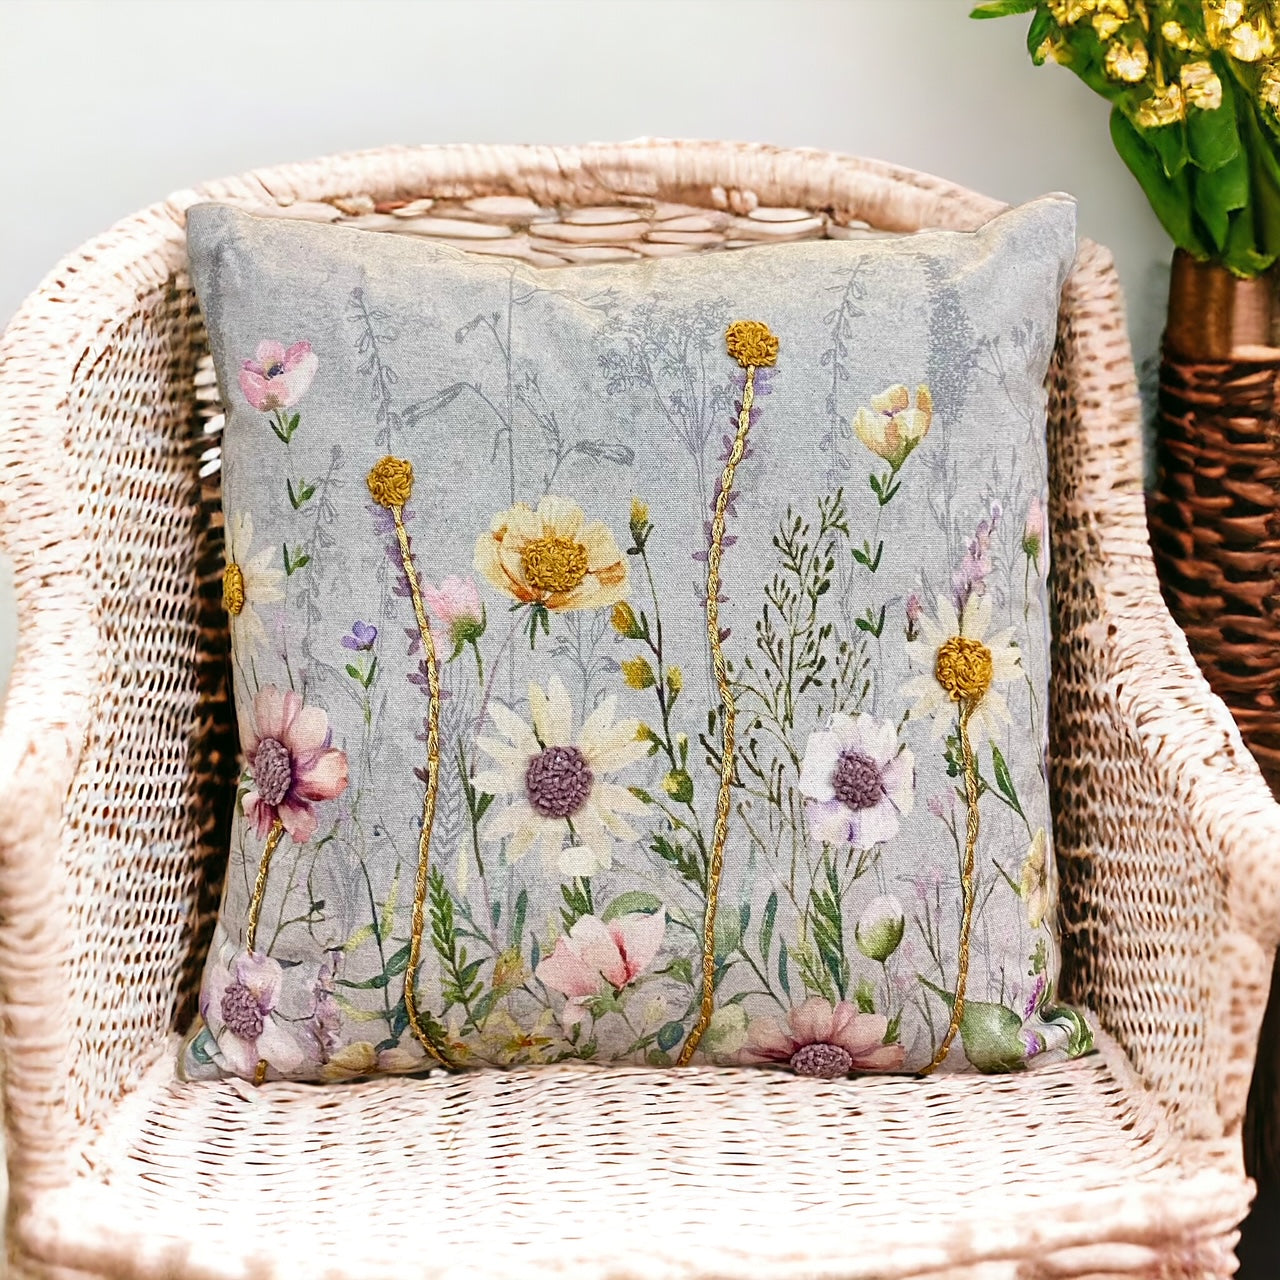 Square Embroidered Cushion, pinks,creams & yellows